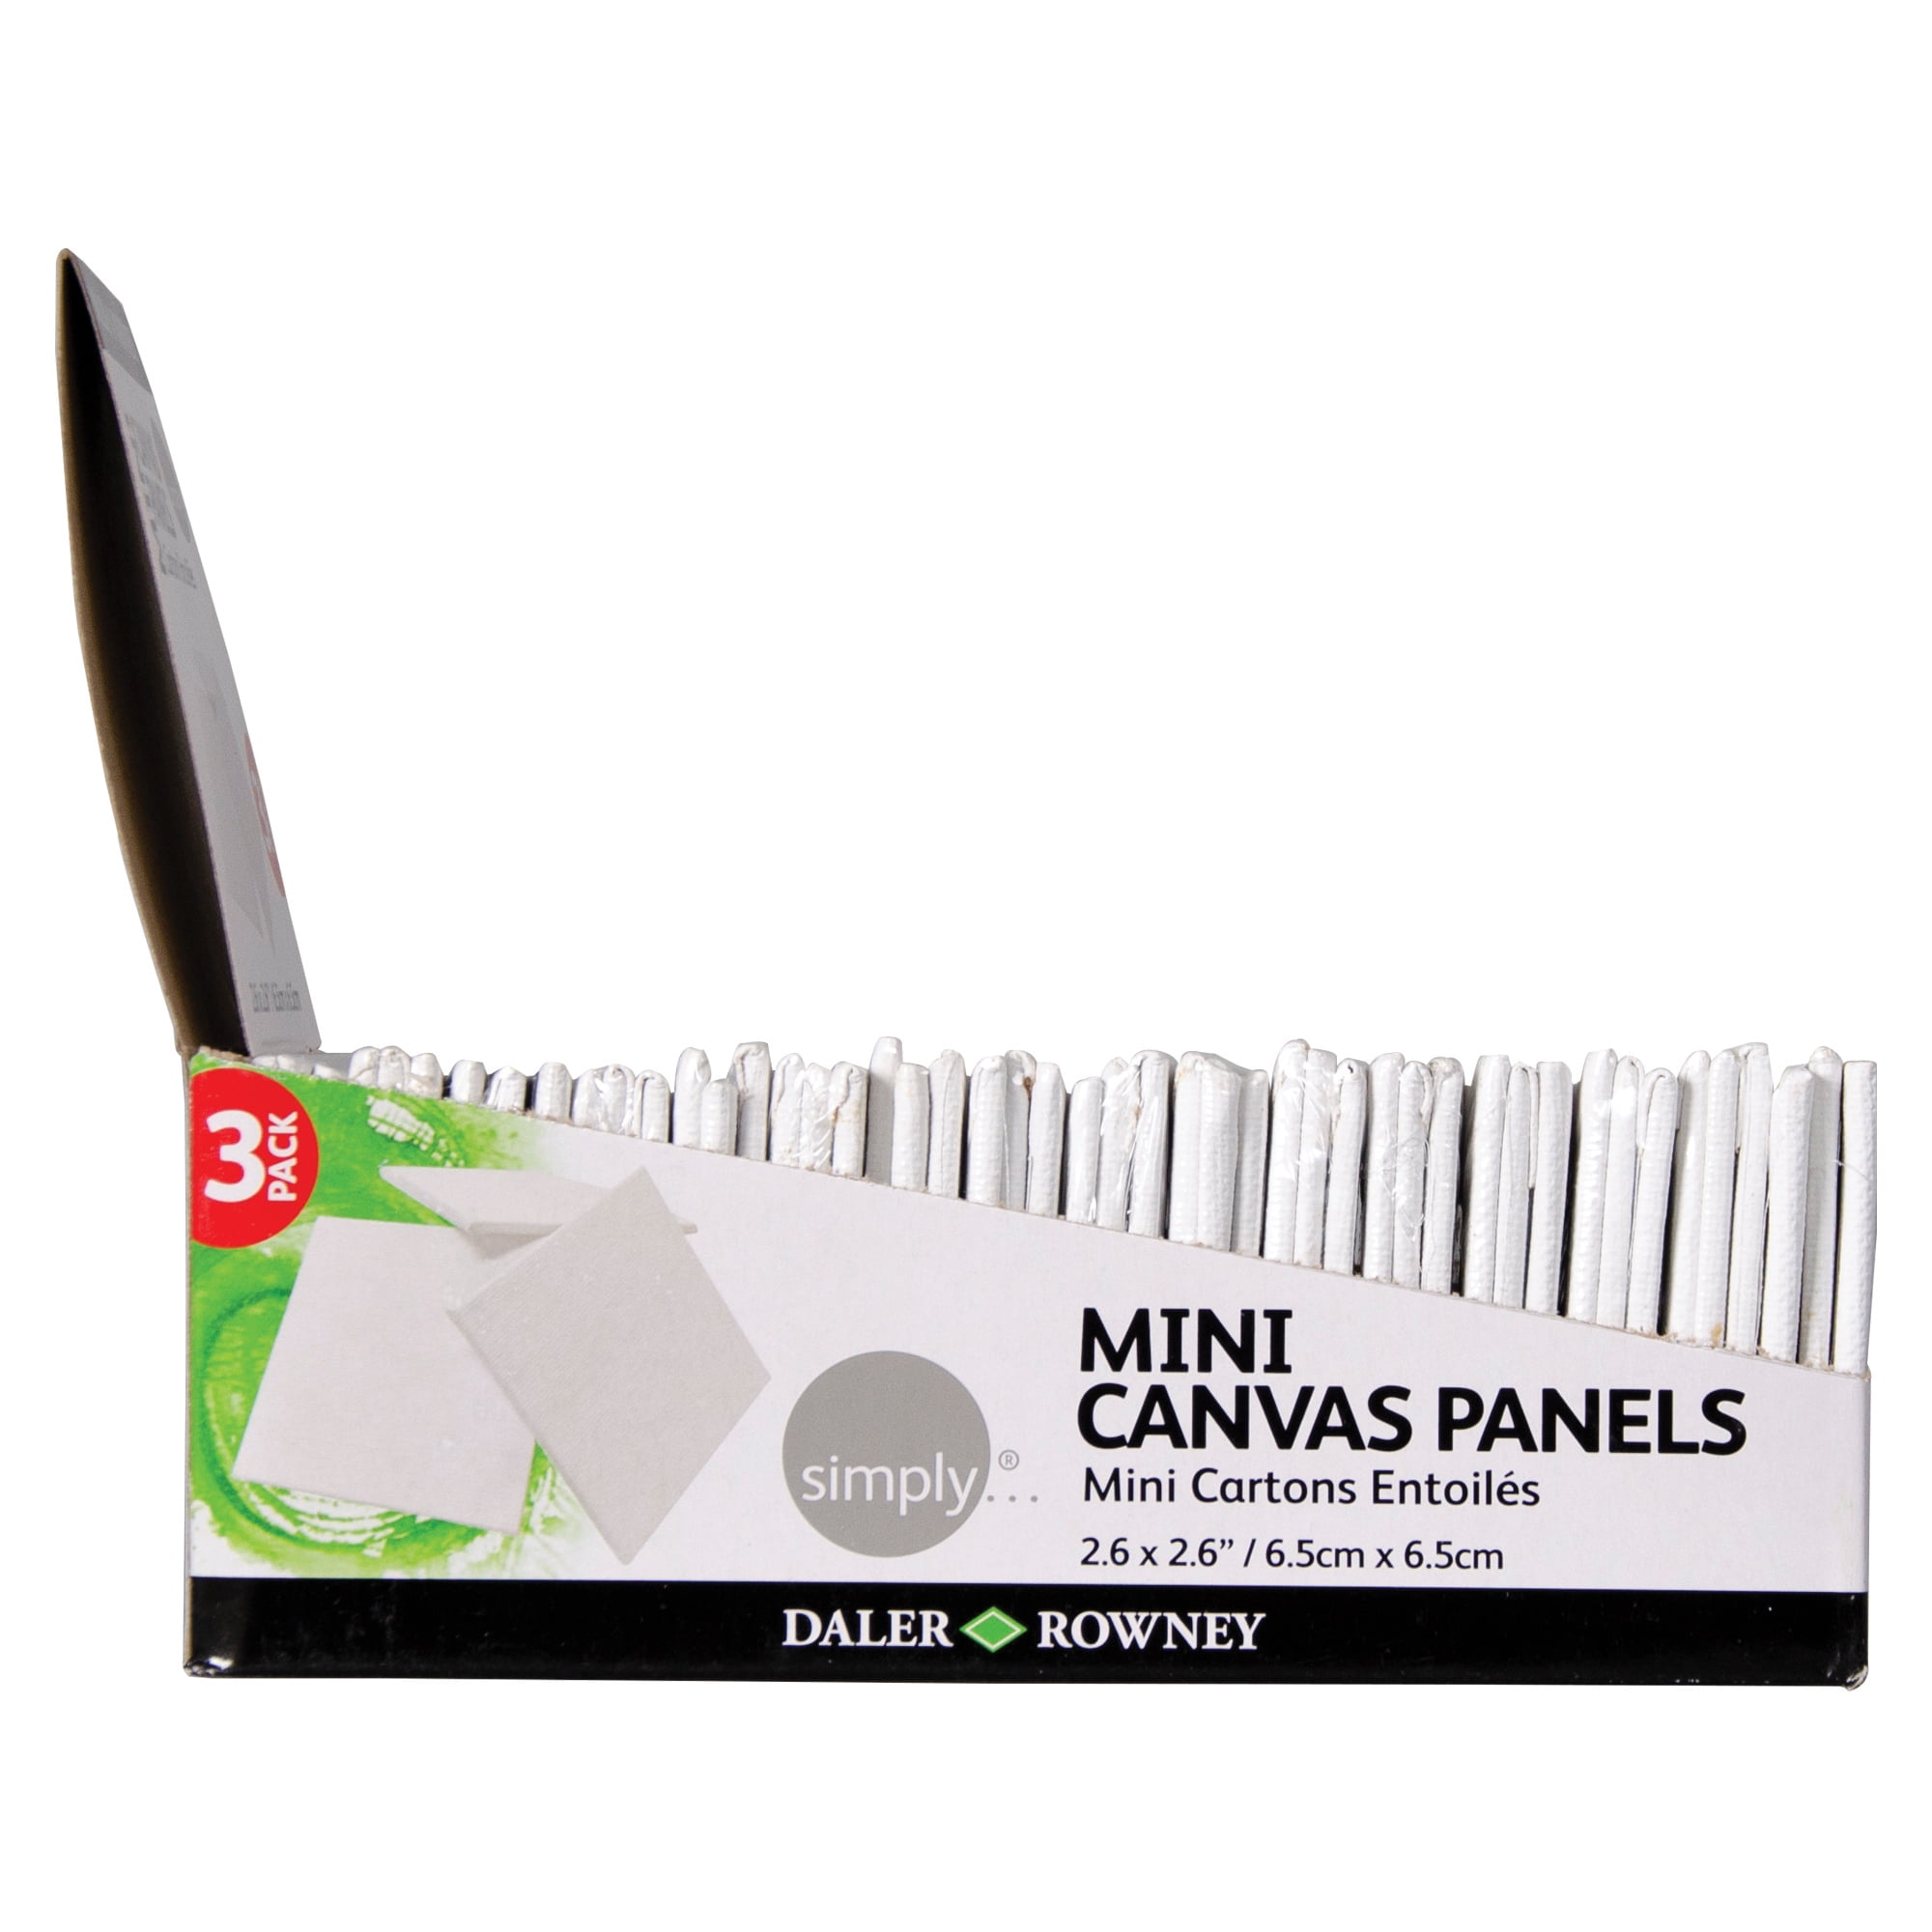 Daler-Rowney Simply Canvas Panel 11x14-Inch 3 Pack